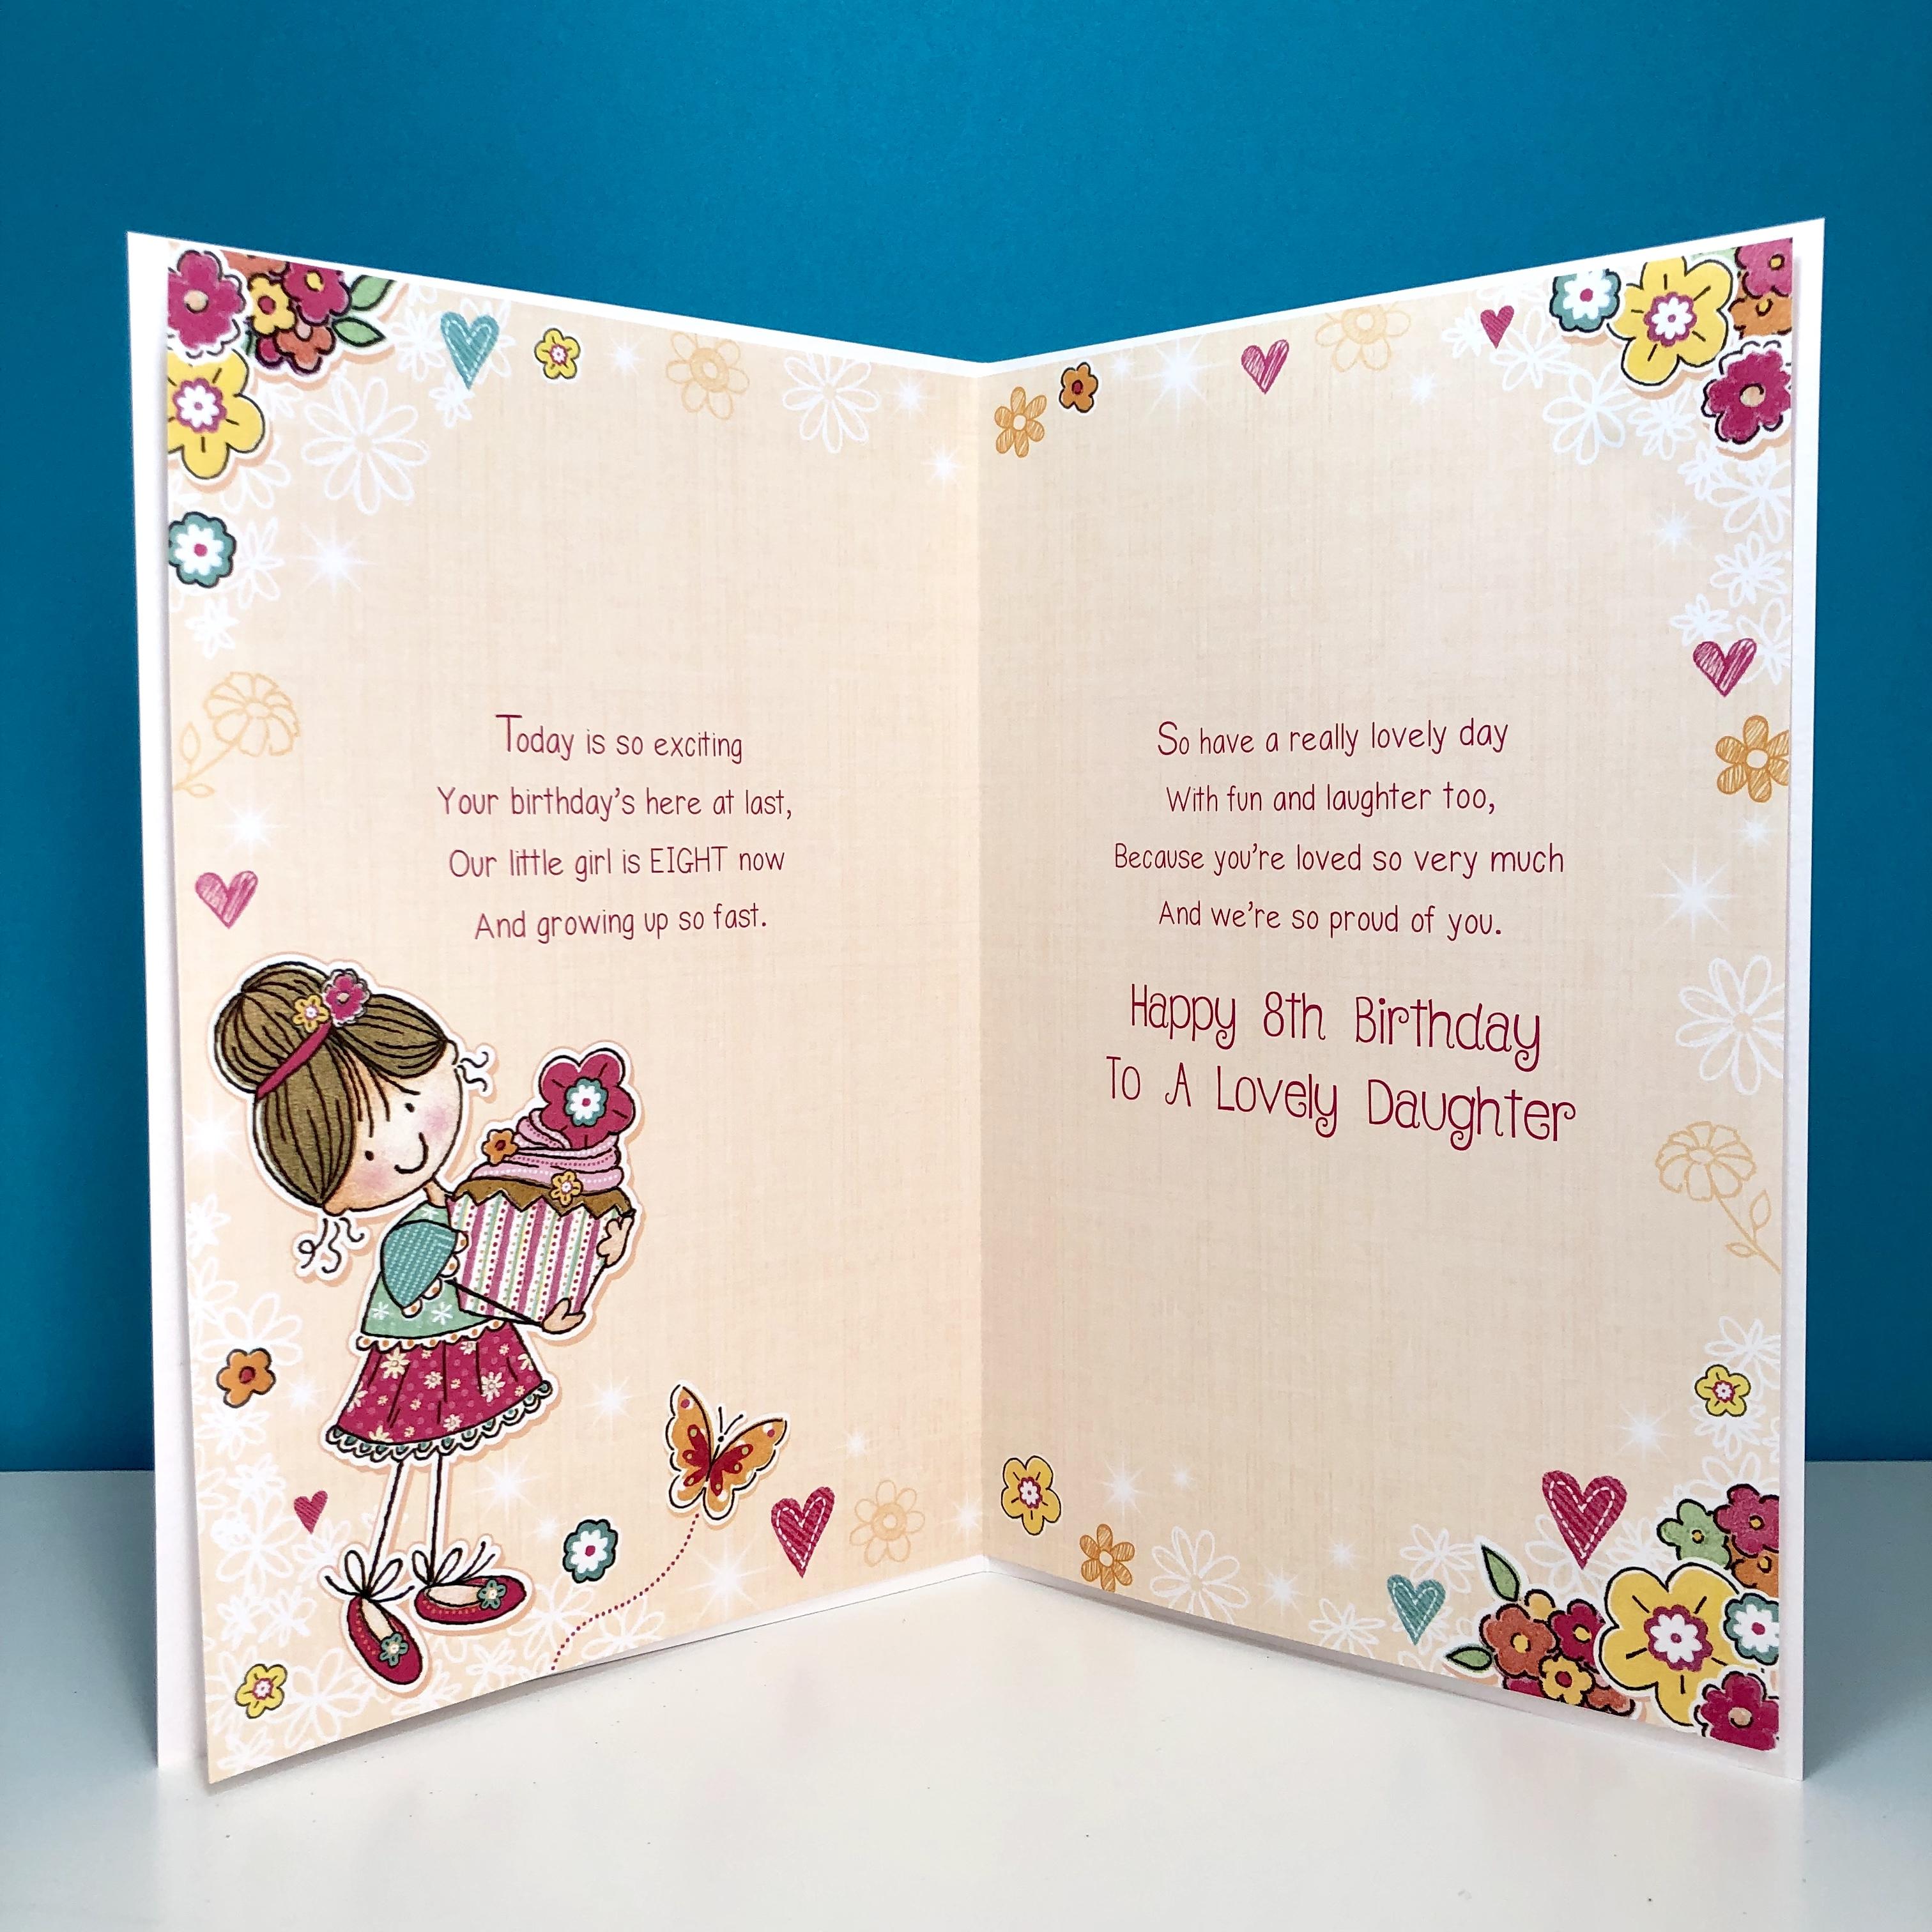 Age 8 Daughter Card Showing The Inside Text And Layout